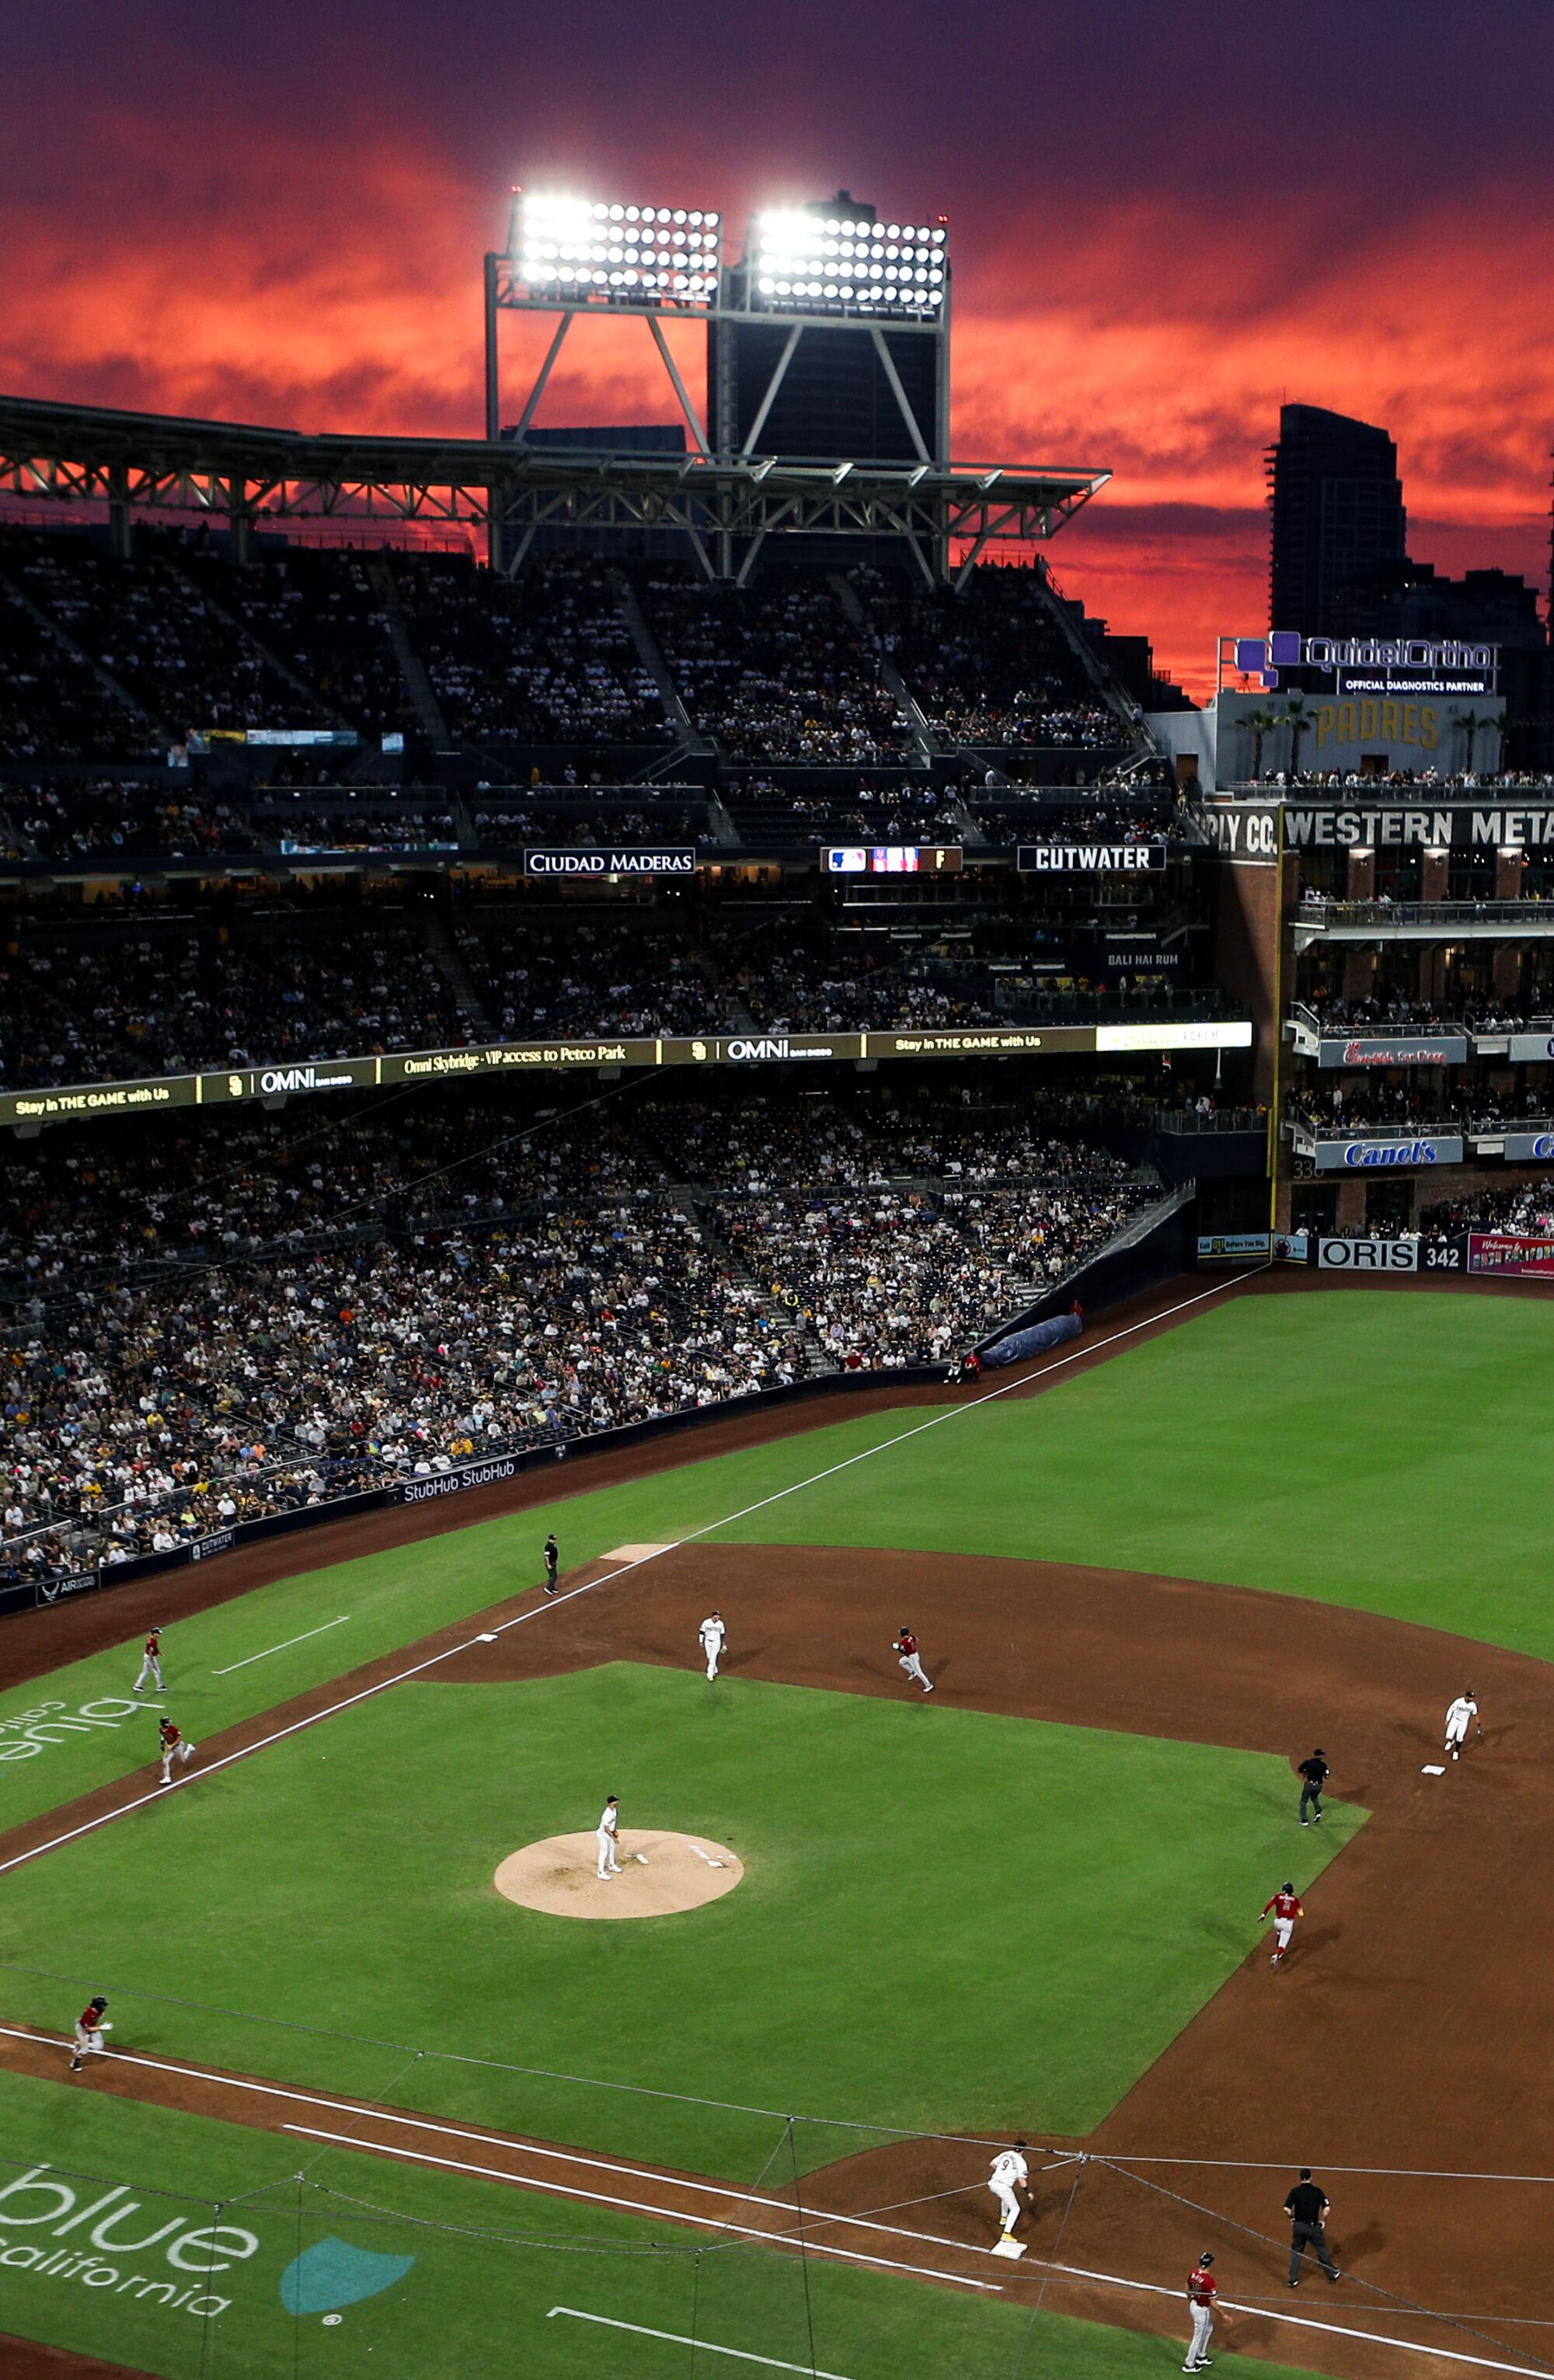 A long, miserable day': Padres gut-punched twice in doubleheader